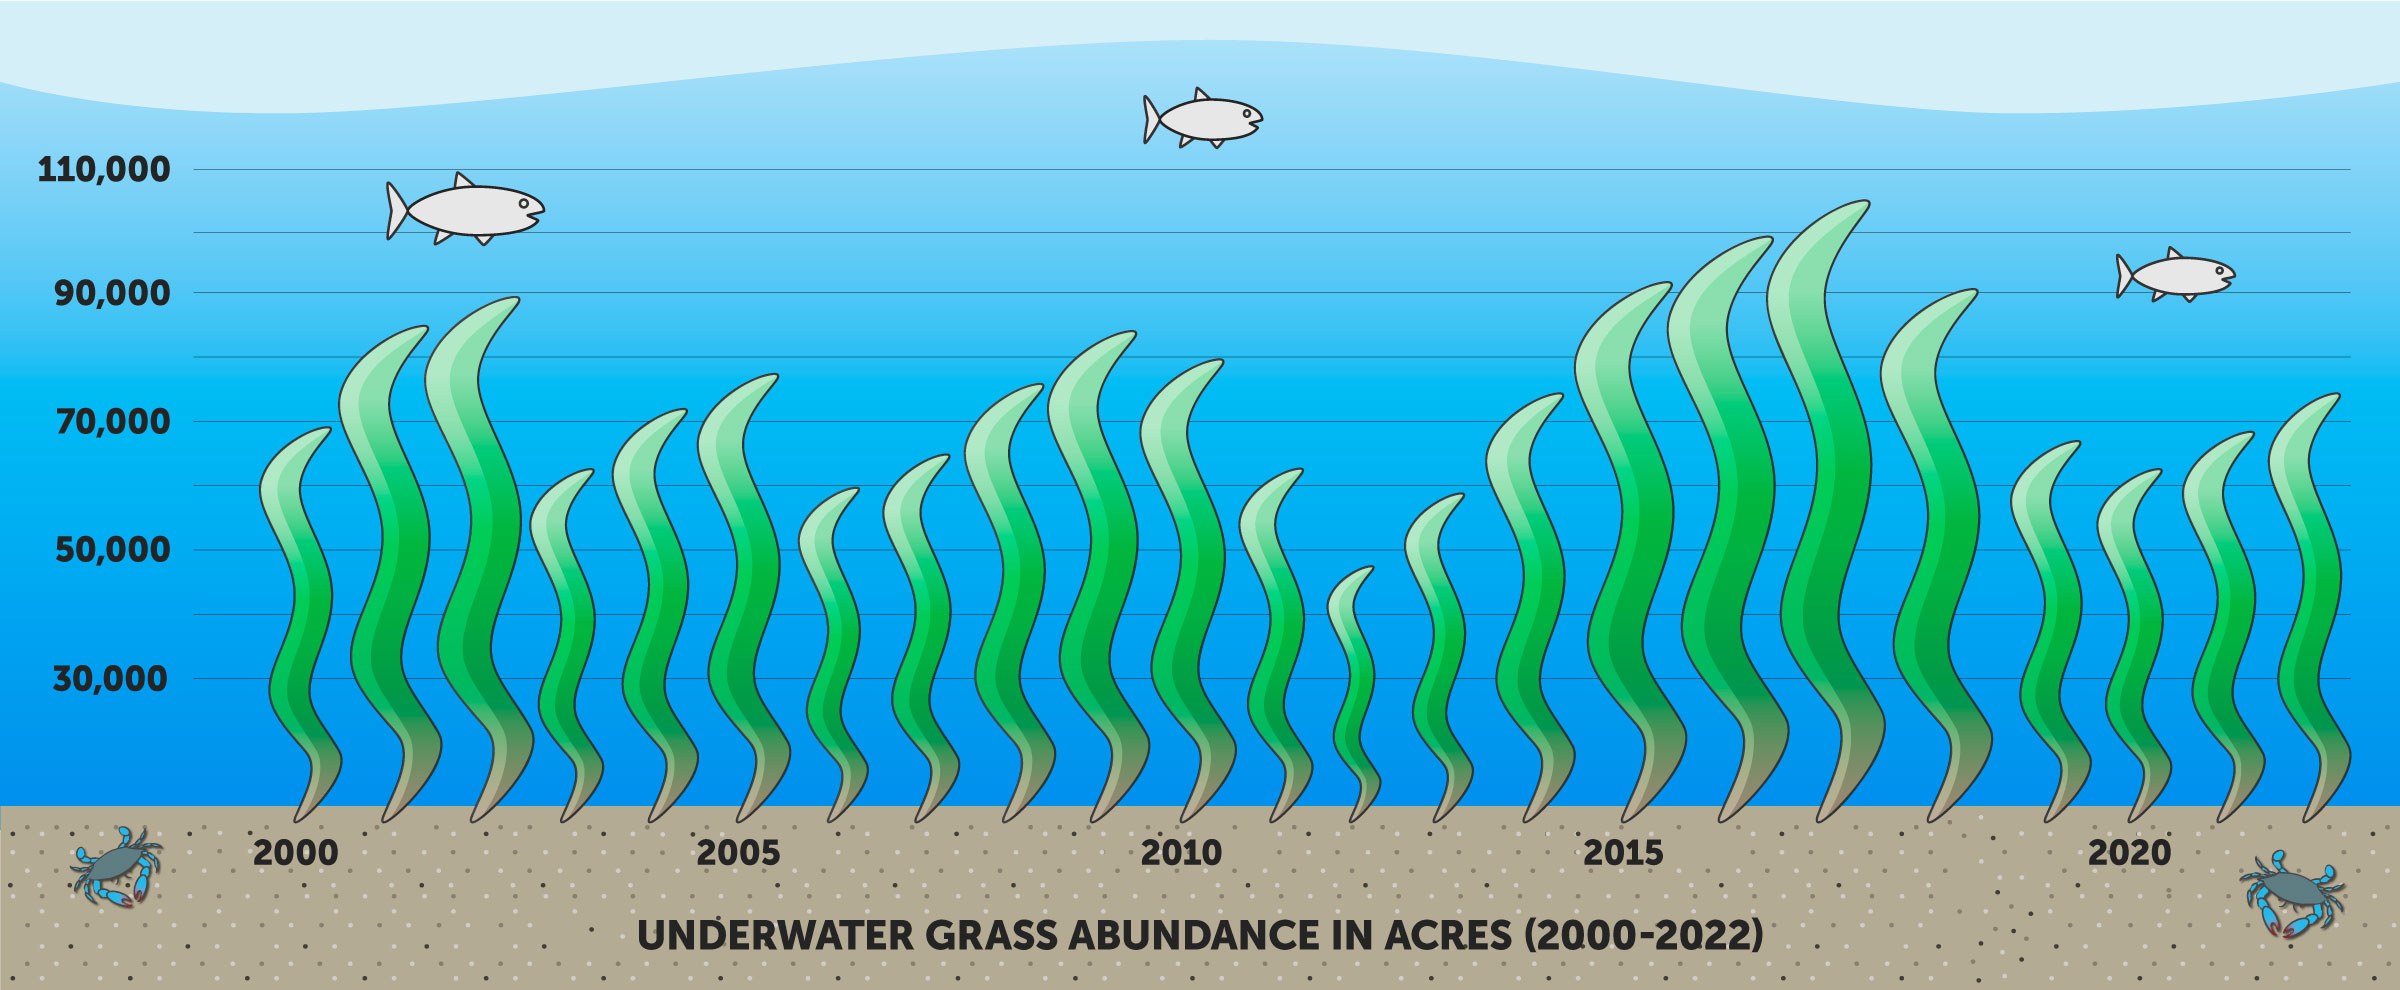 Bar graph illustrating the number of acres of underwater grasses in the Chesapeake Bay from 2000 to 2019.